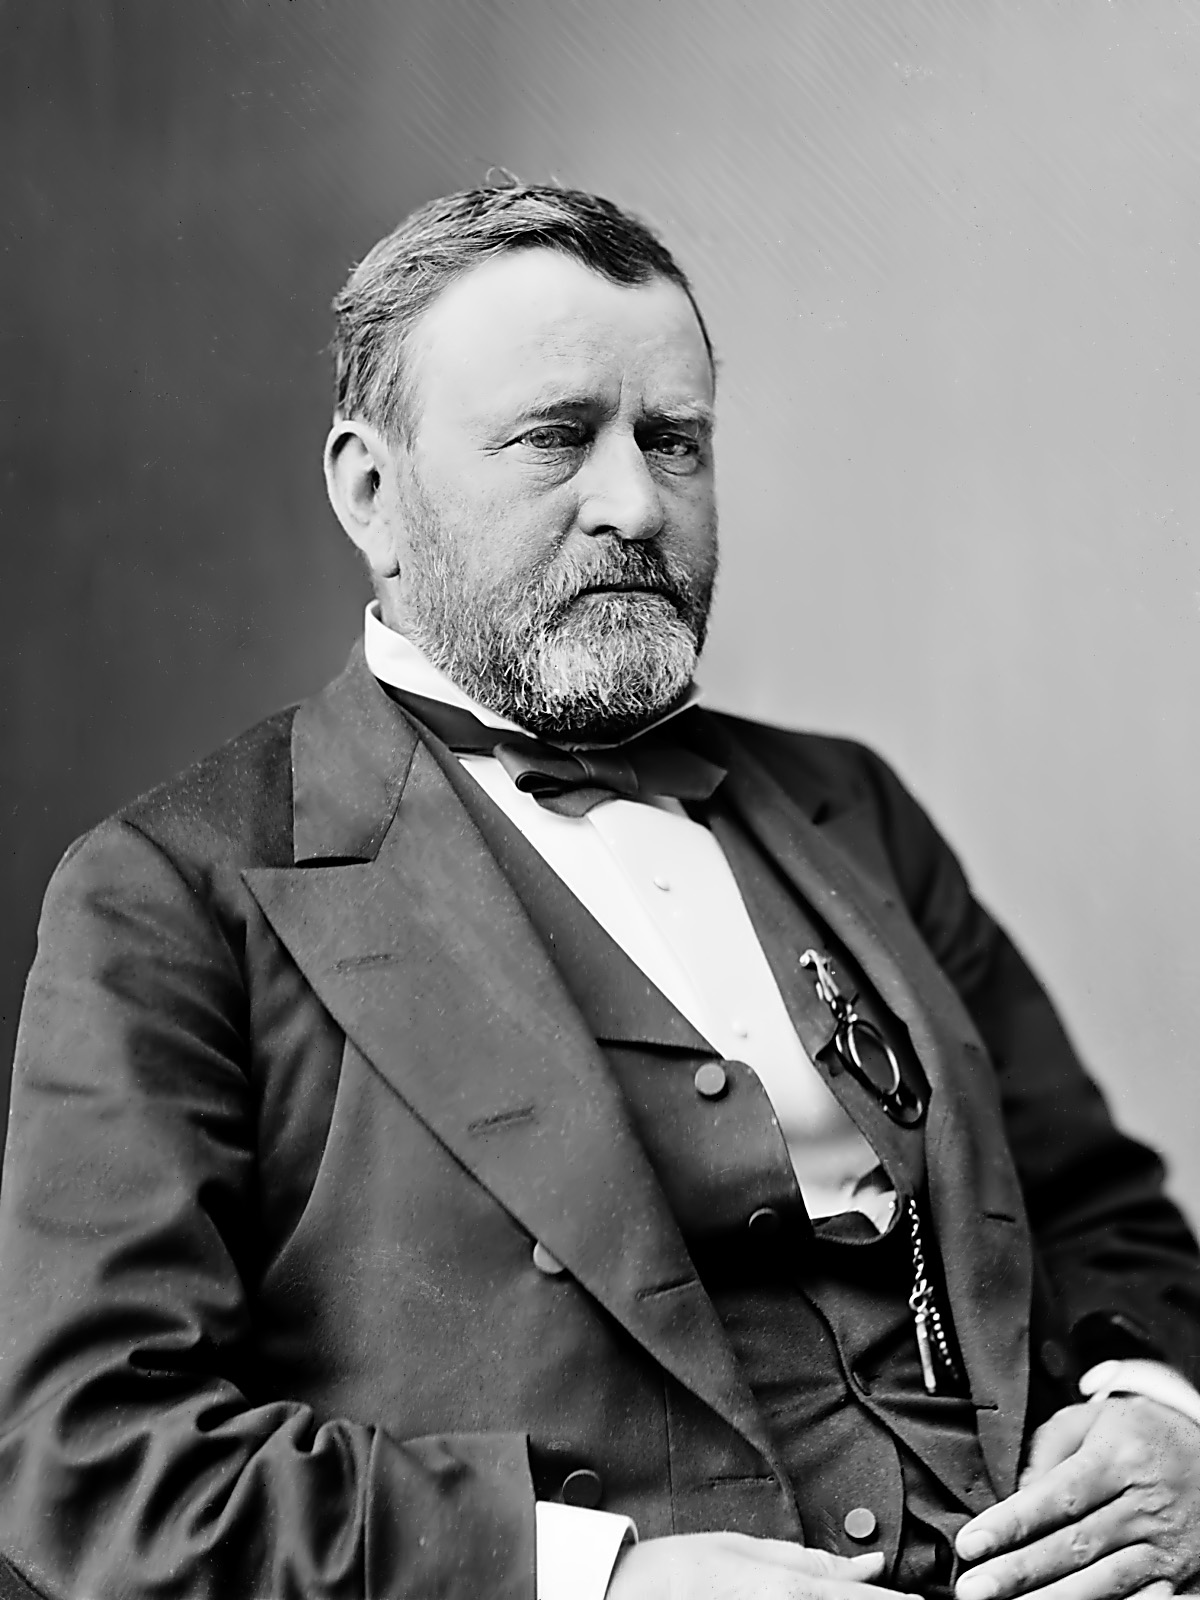 Pictures of Ulysses S. Grant